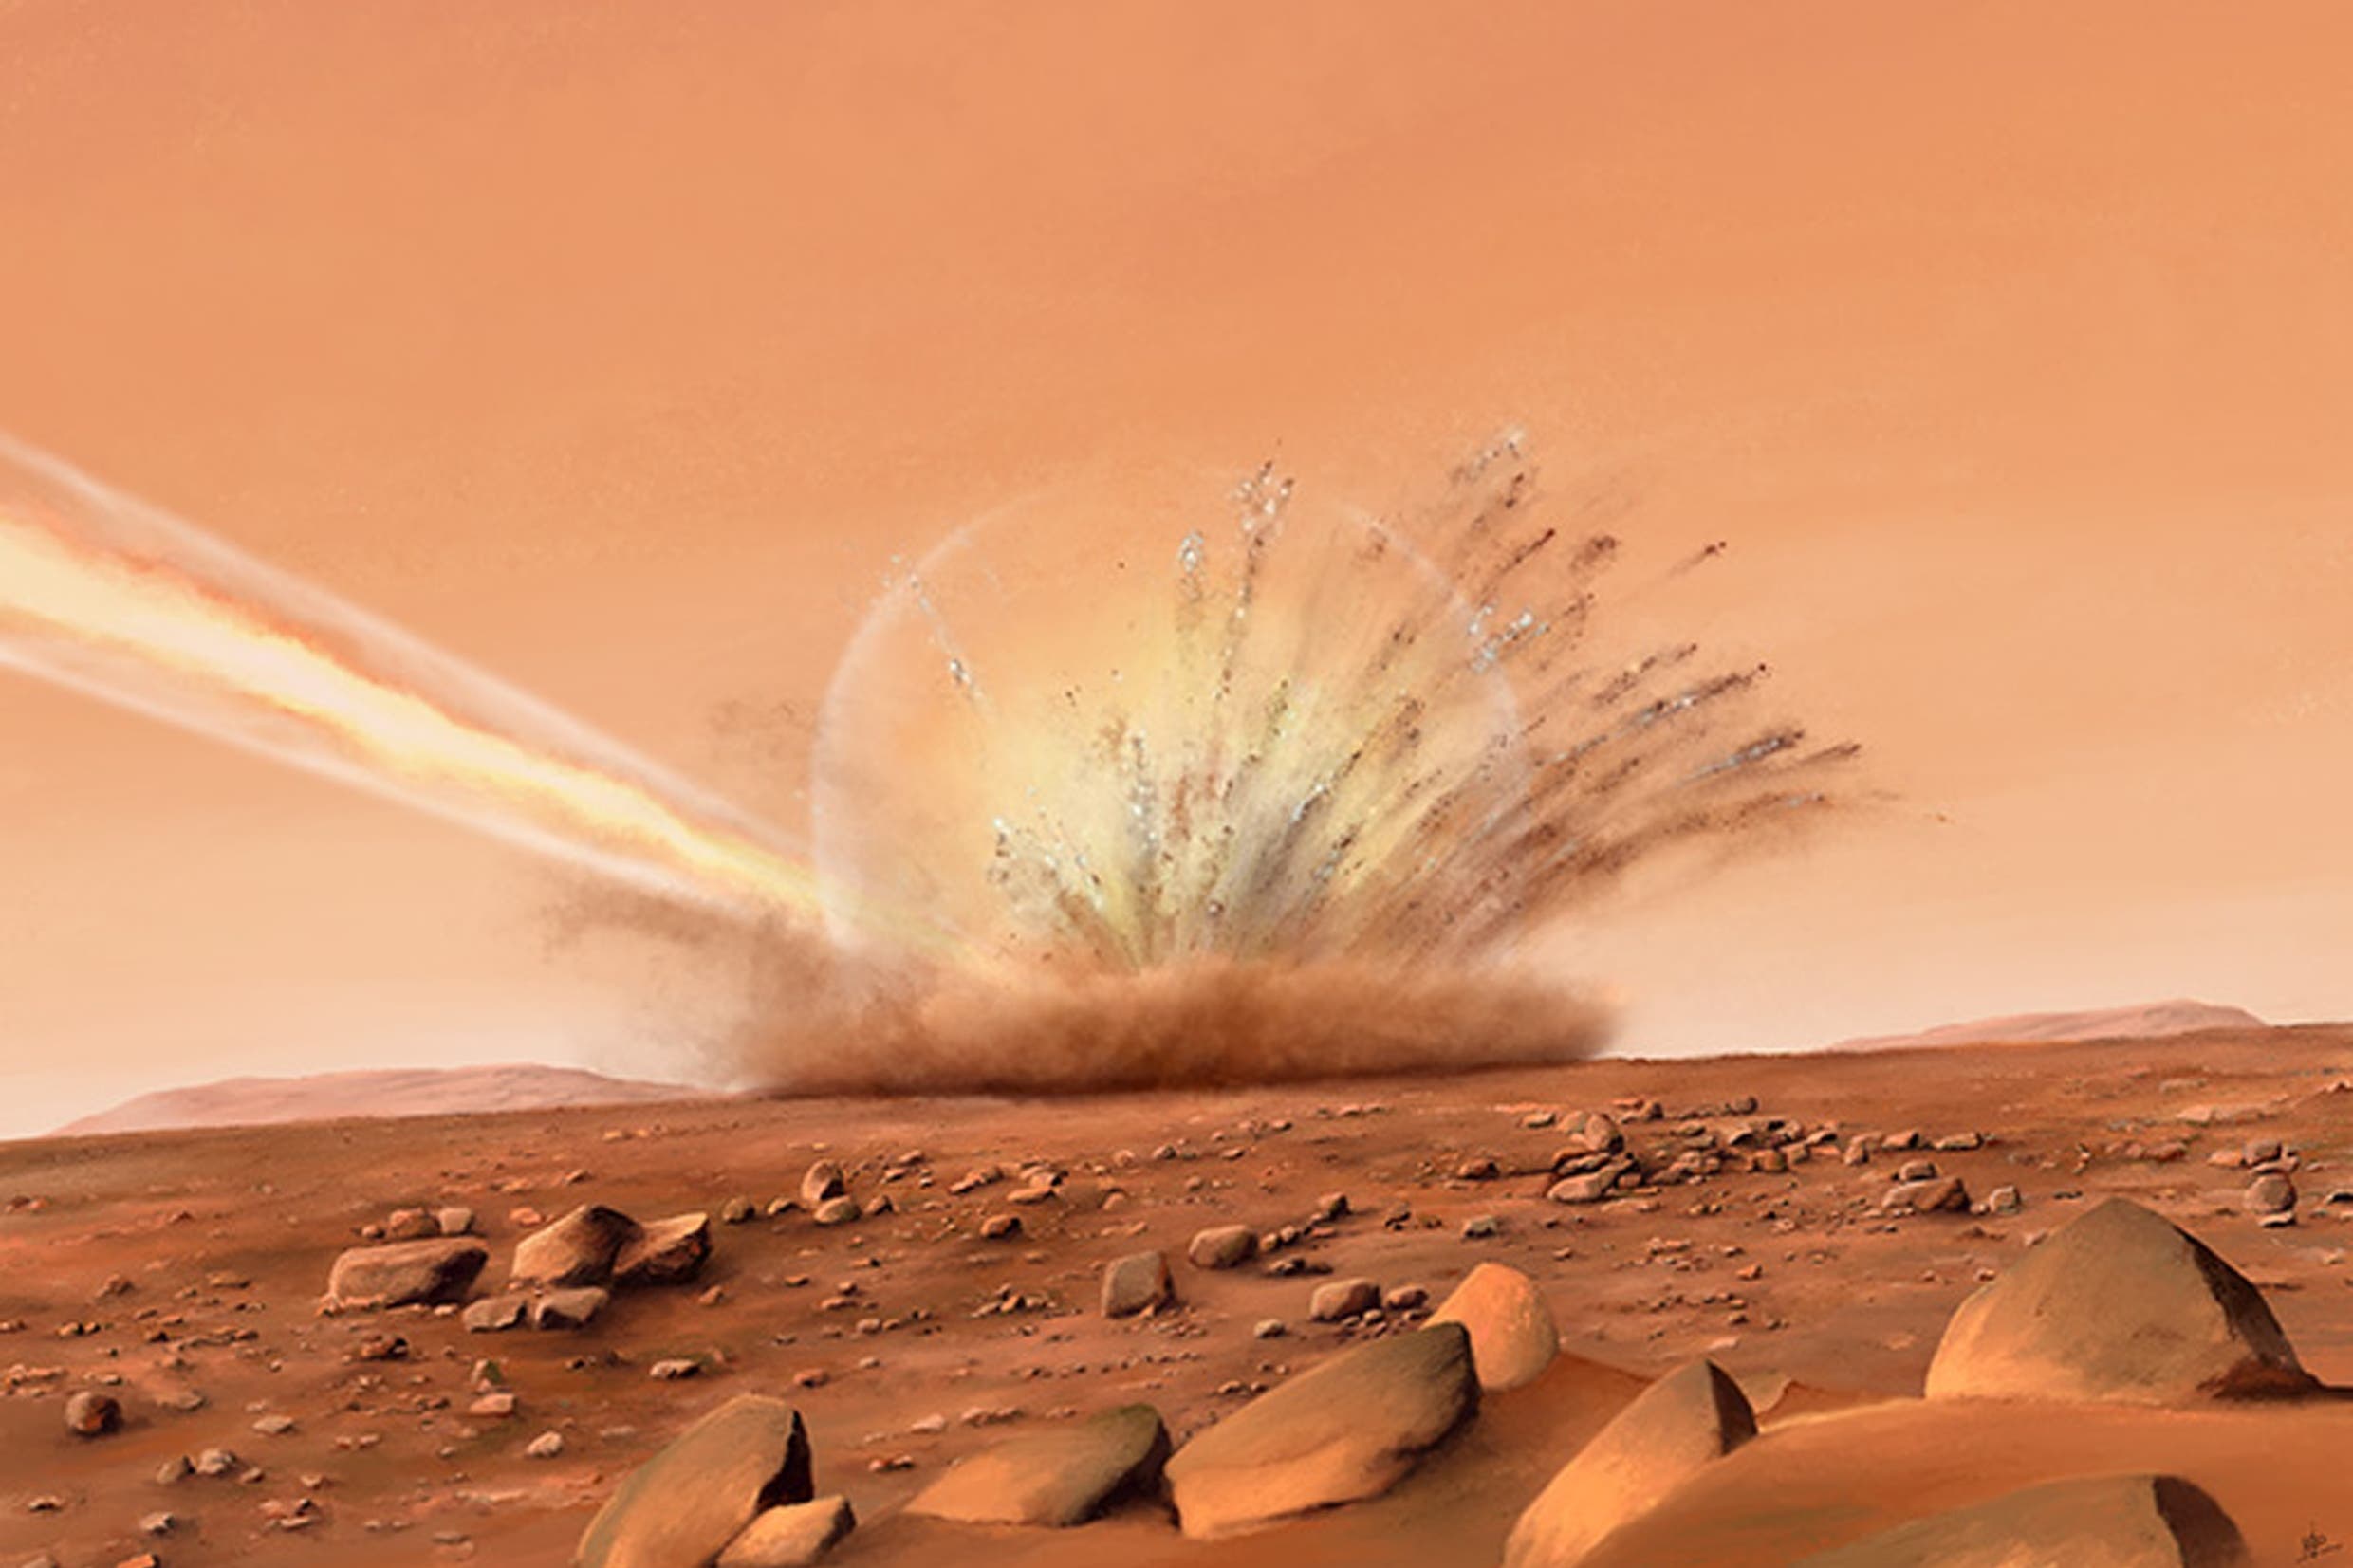 Recent meteorite crashes on Mars 'could reveal clues about planet's origin